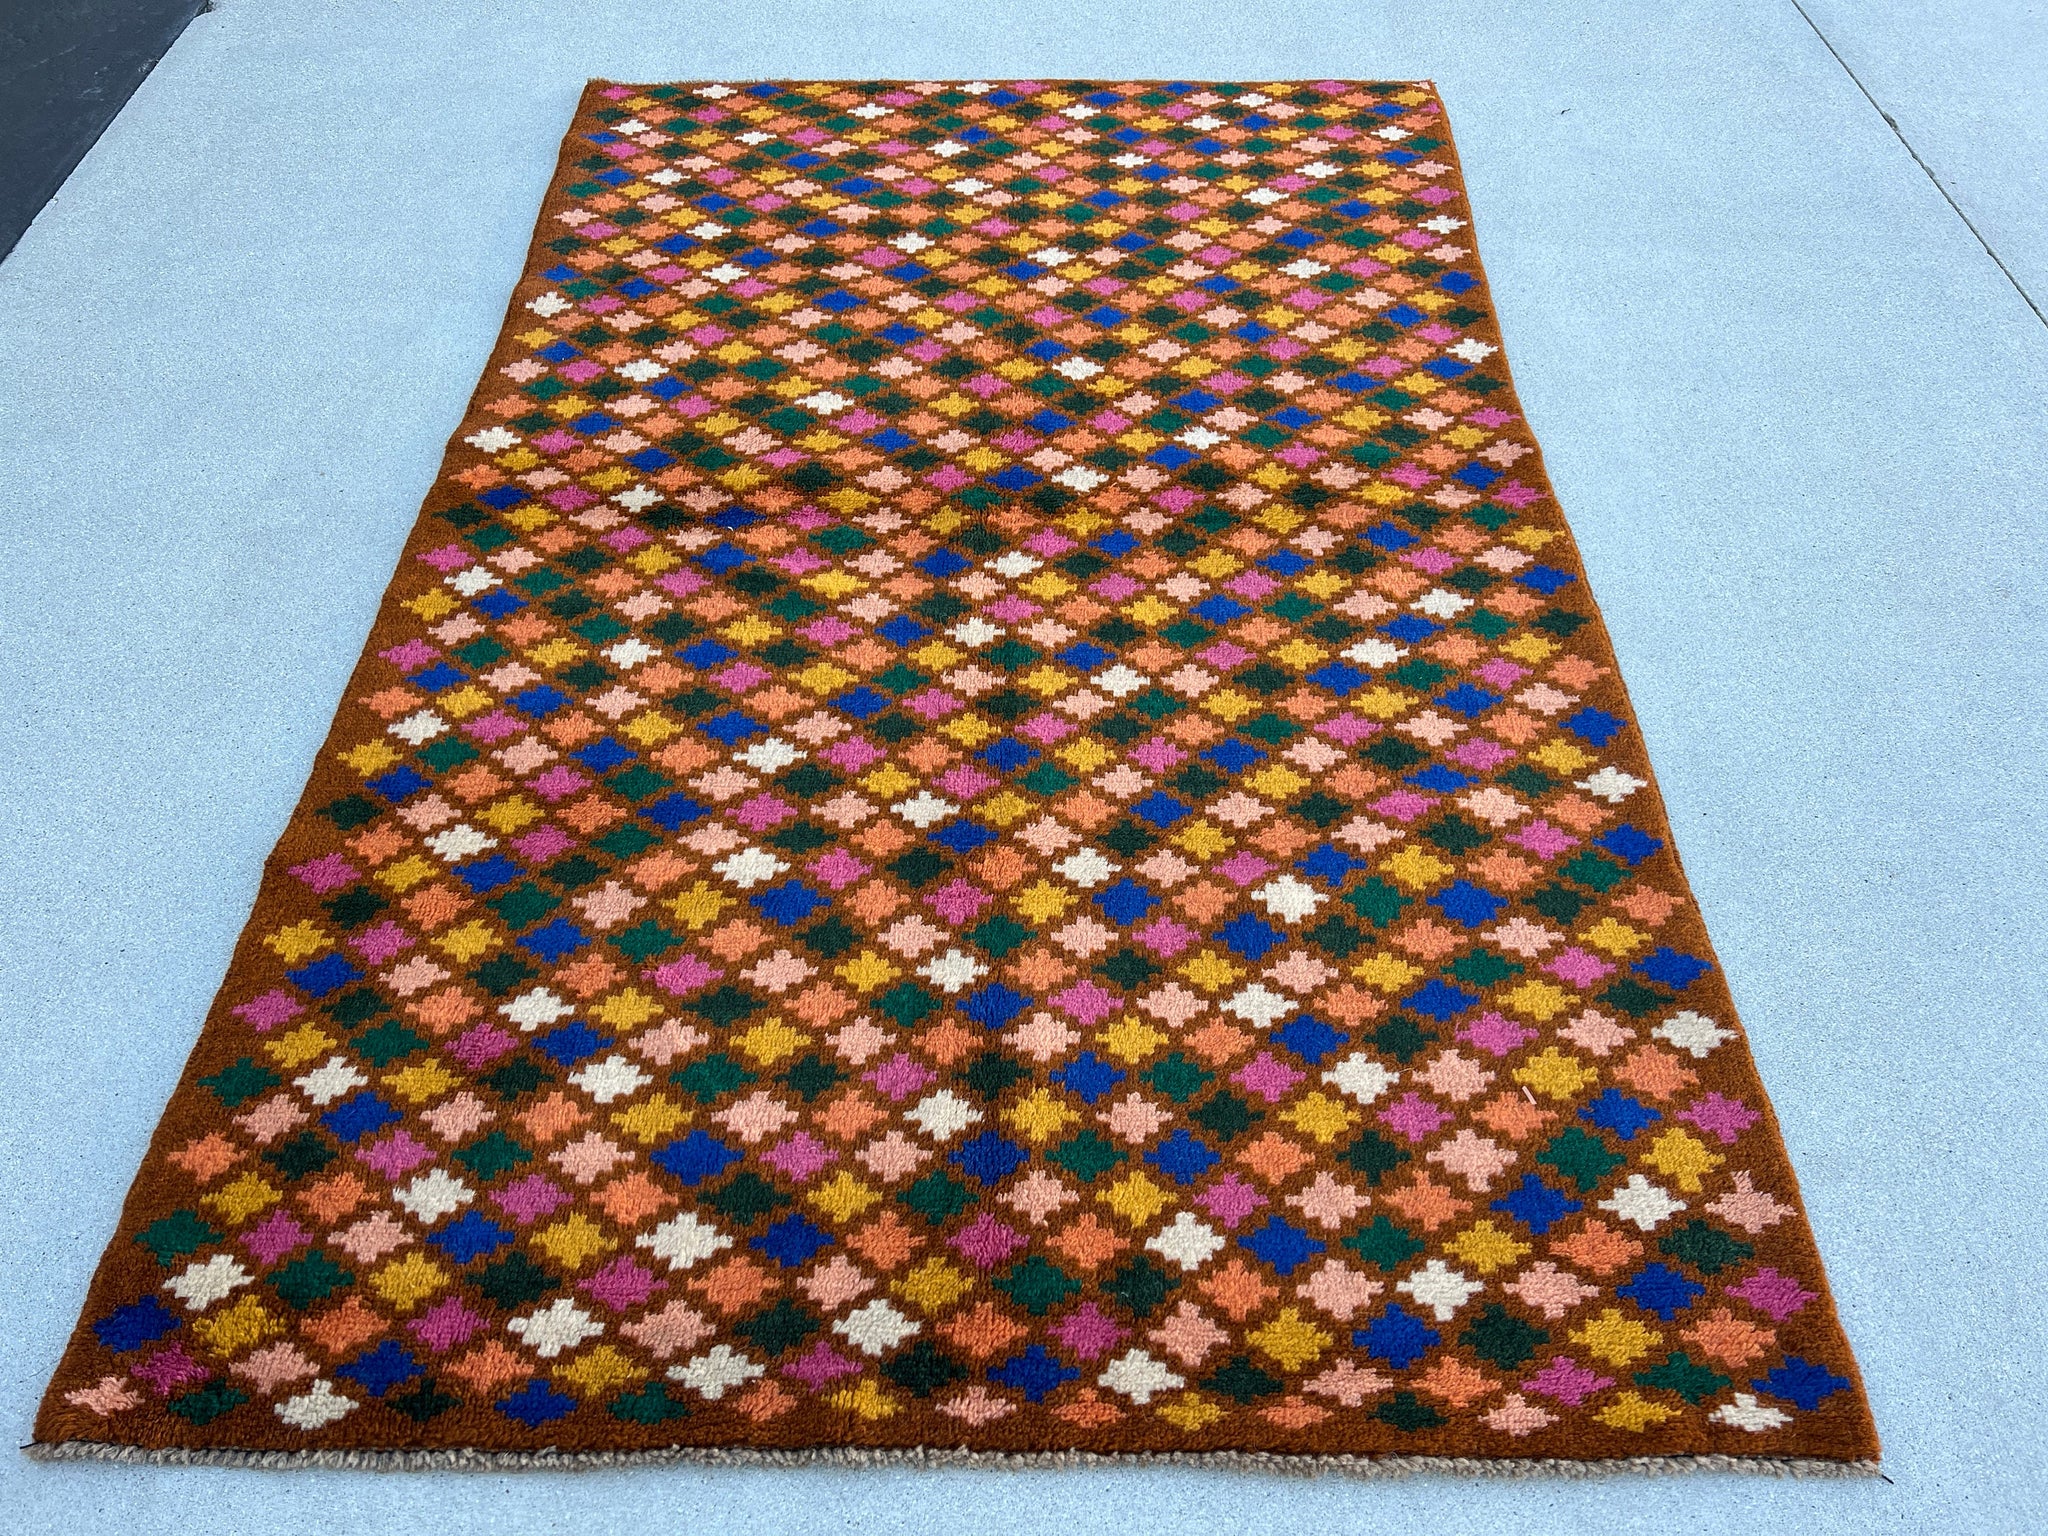 4x6 (120x185) Handmade Vintage Baluch Afghan Rug | Copper Brown Ivory Blue Pine Fern Green Rose Blush Pink | Geometric Hand Knotted Wool